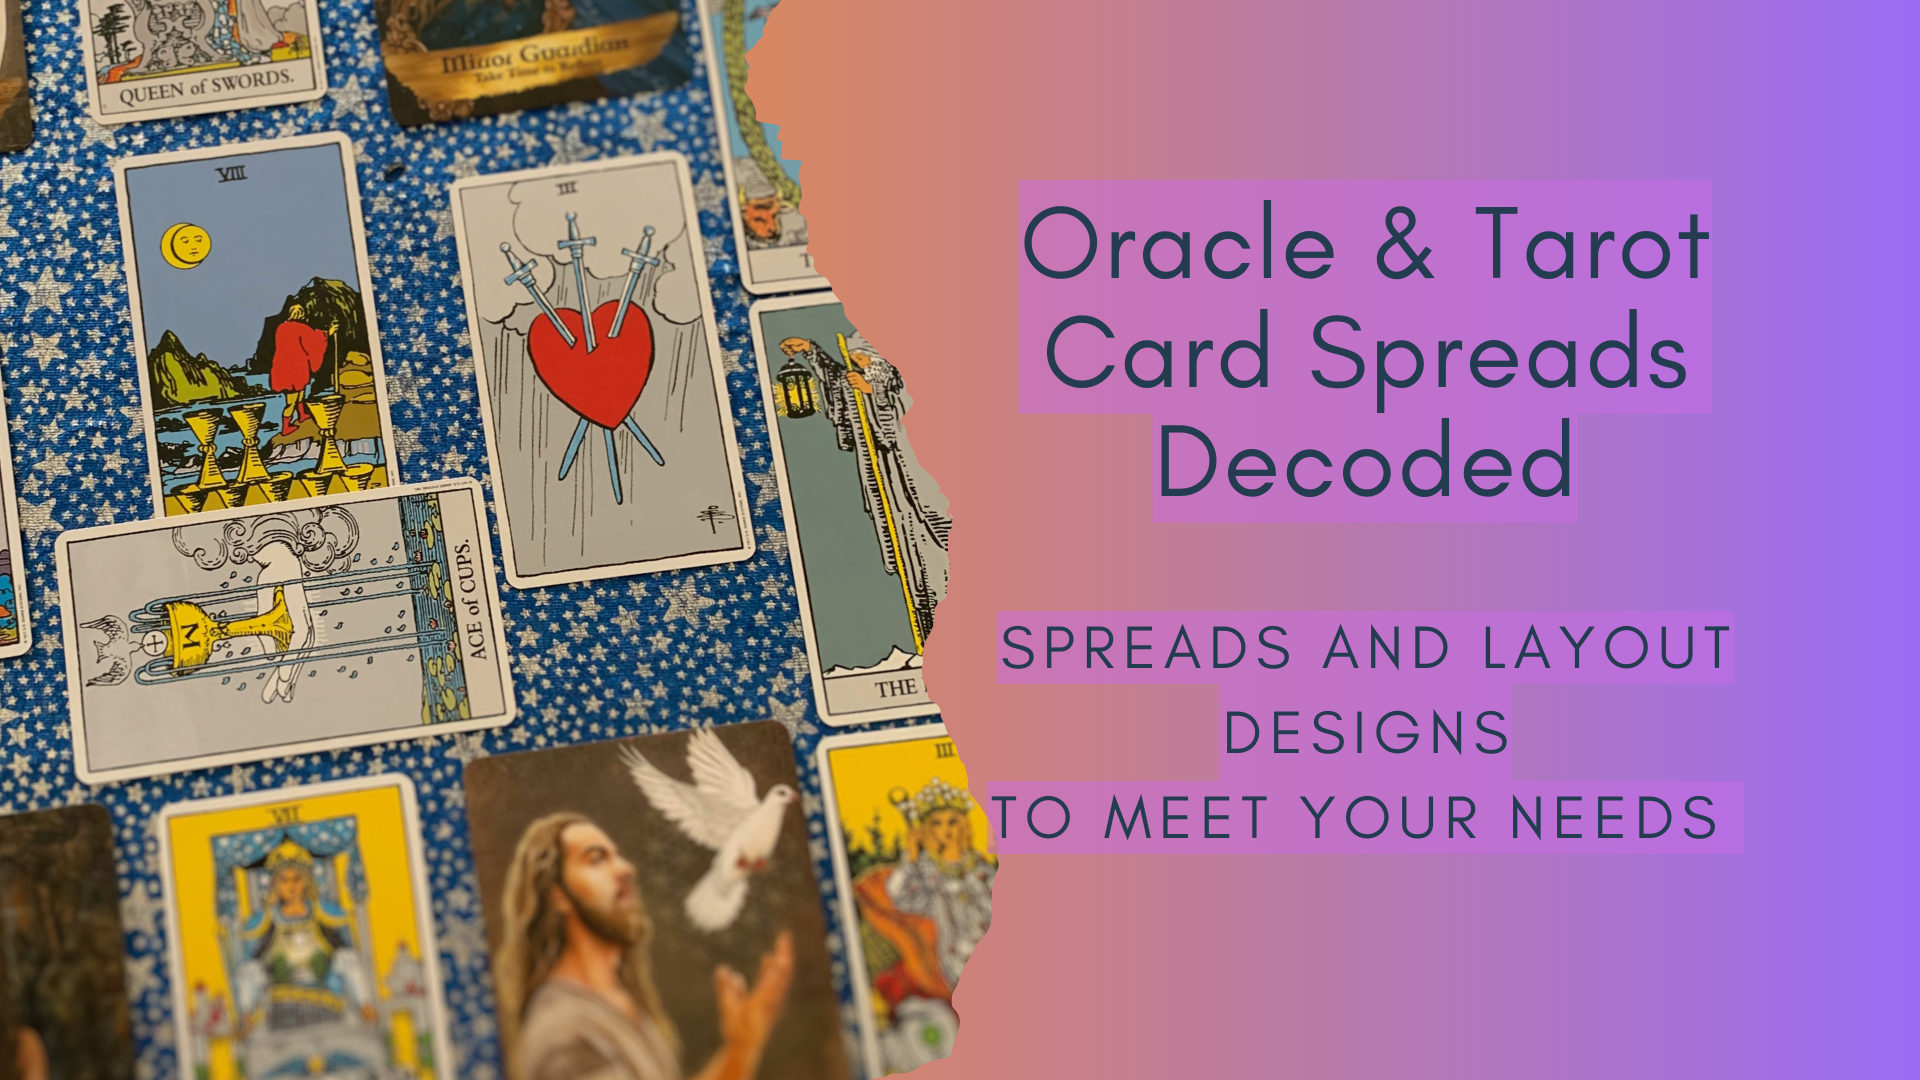 Oracle and Tarot Card Spreads Decoded Workshop